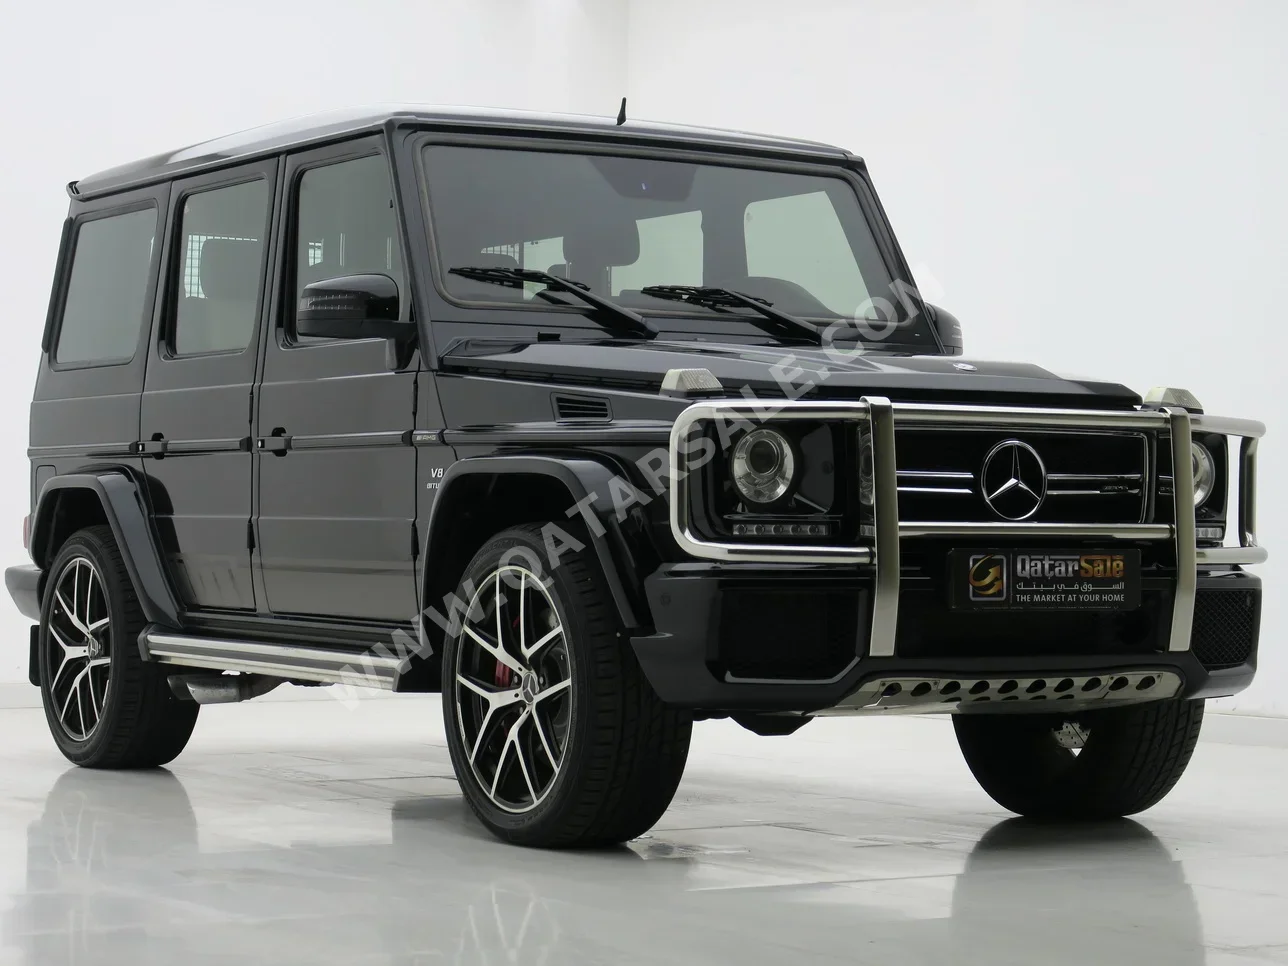 Mercedes-Benz  G-Class  63 AMG  2015  Automatic  89,700 Km  8 Cylinder  Four Wheel Drive (4WD)  SUV  Black